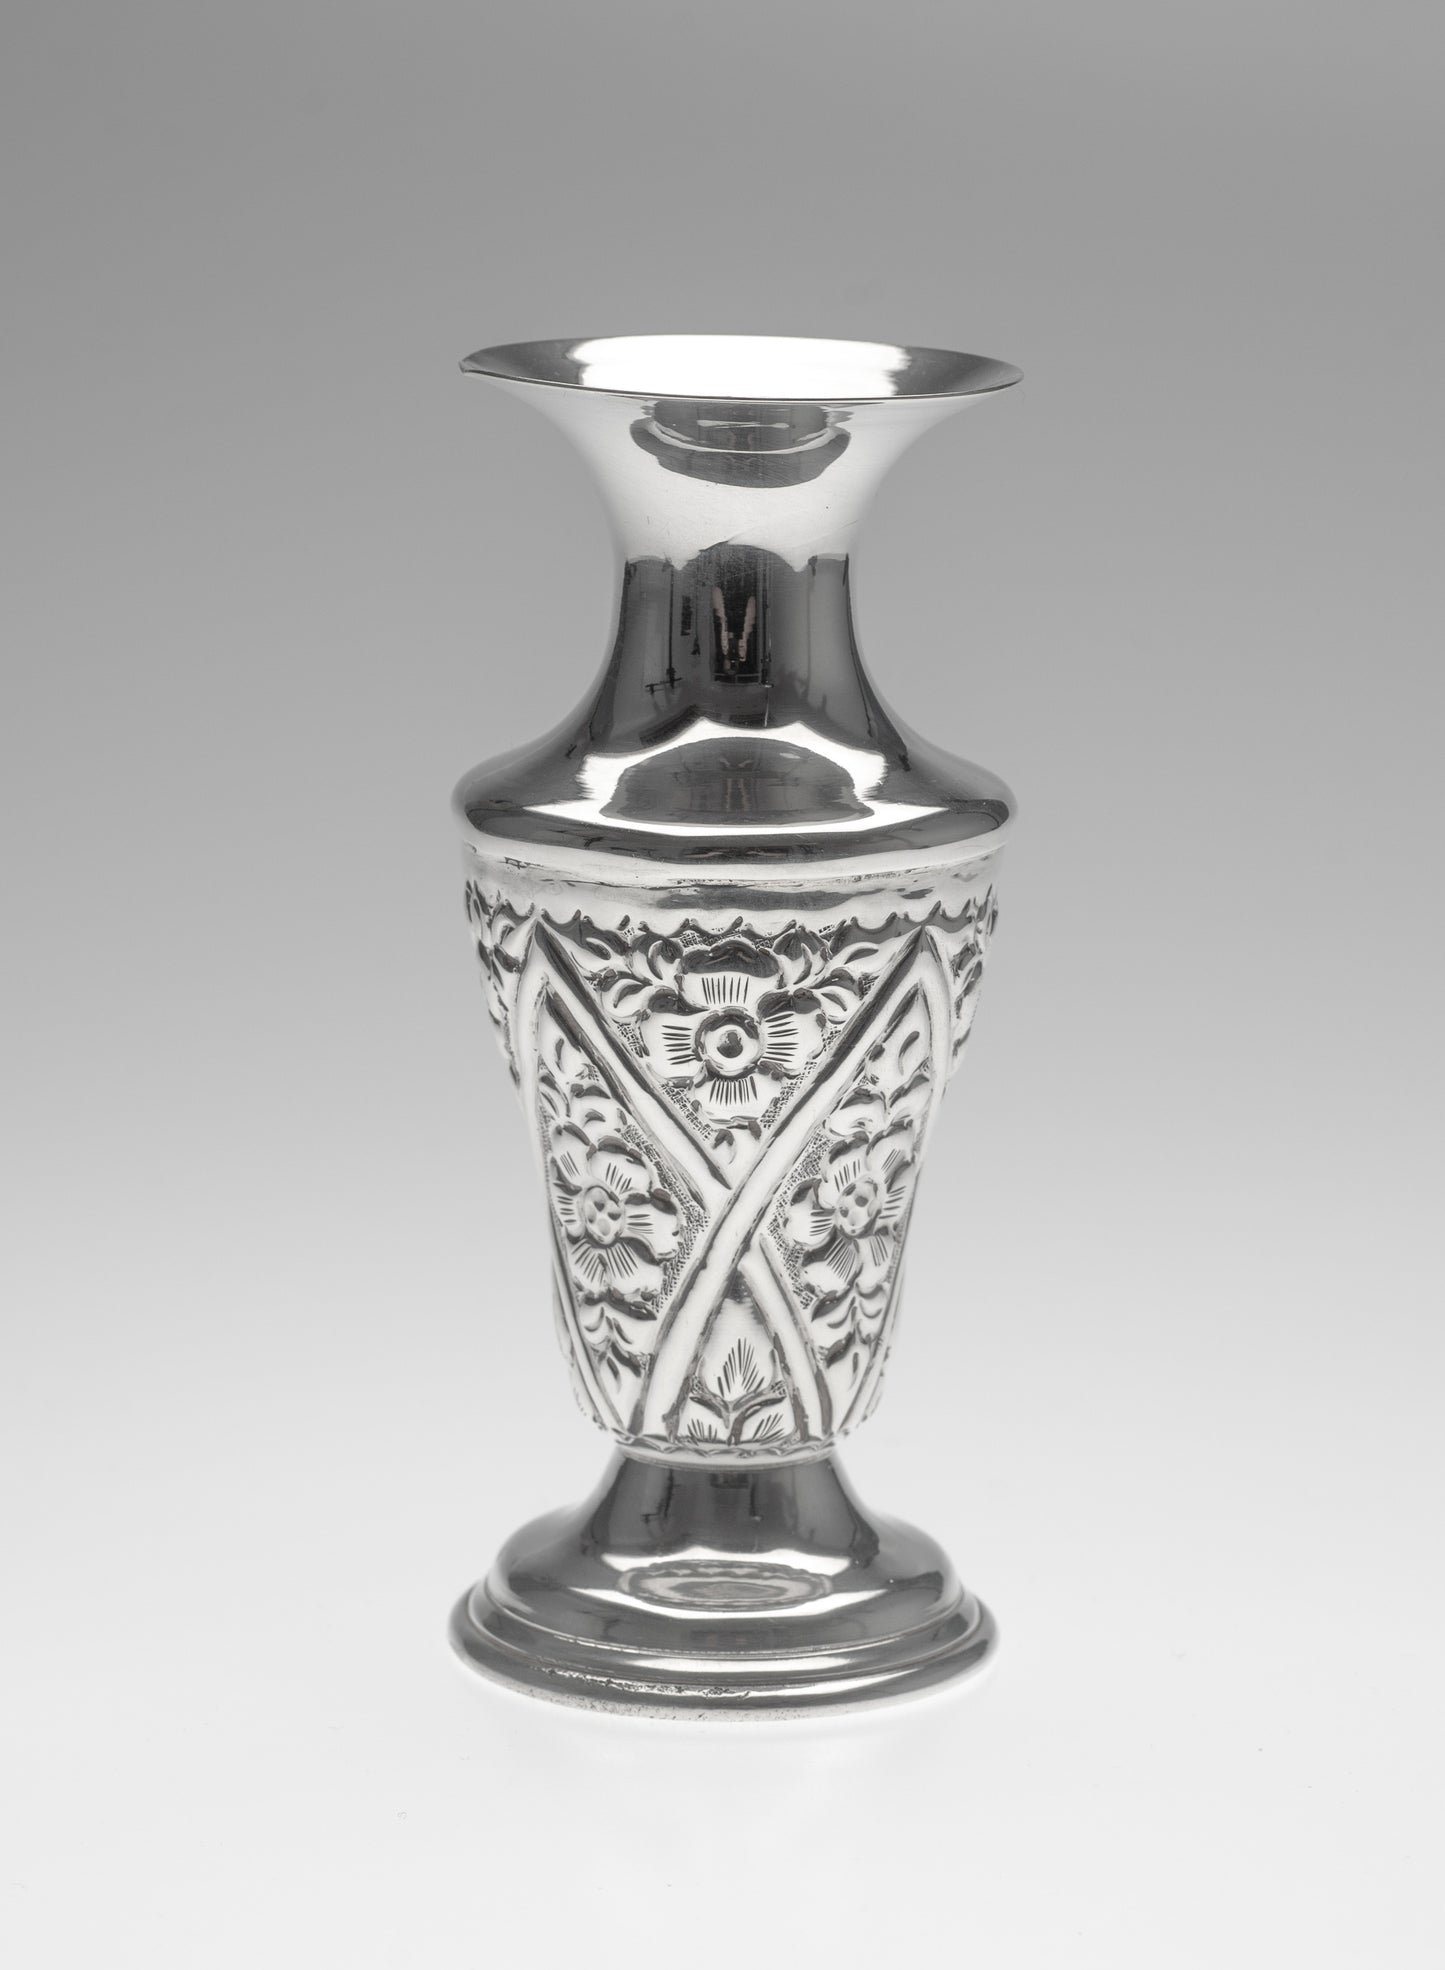 Vintage Egyptian Silver Vase in the Middle Eastern Islamic Style with Floral Panels (Code 2295)